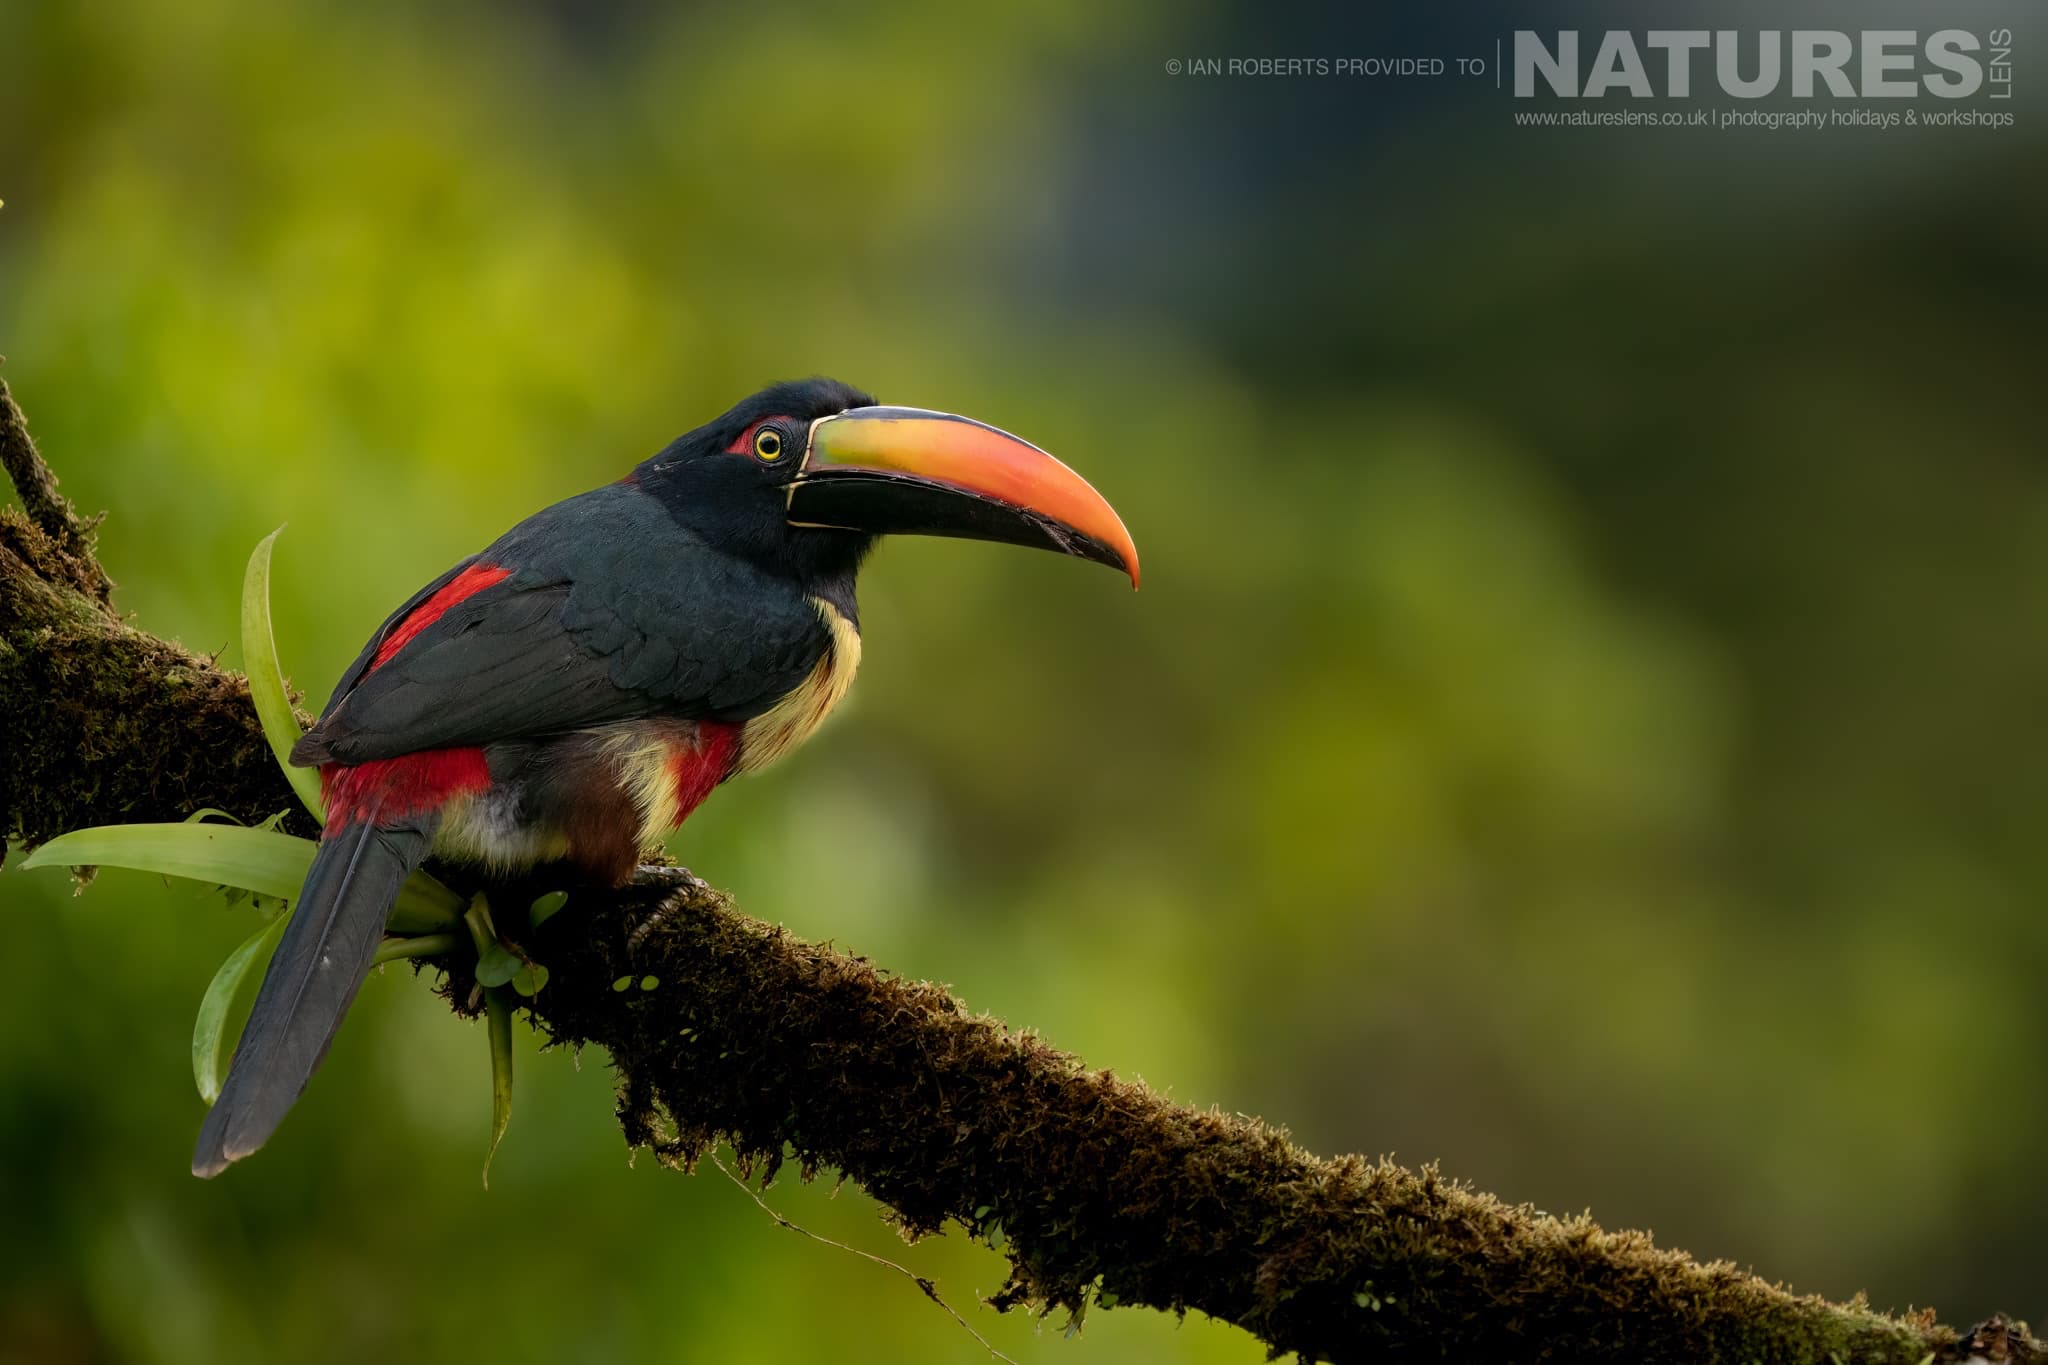 A Fiery Billed Aracari One Of The Toucans In Costa Rica'S Rainforests